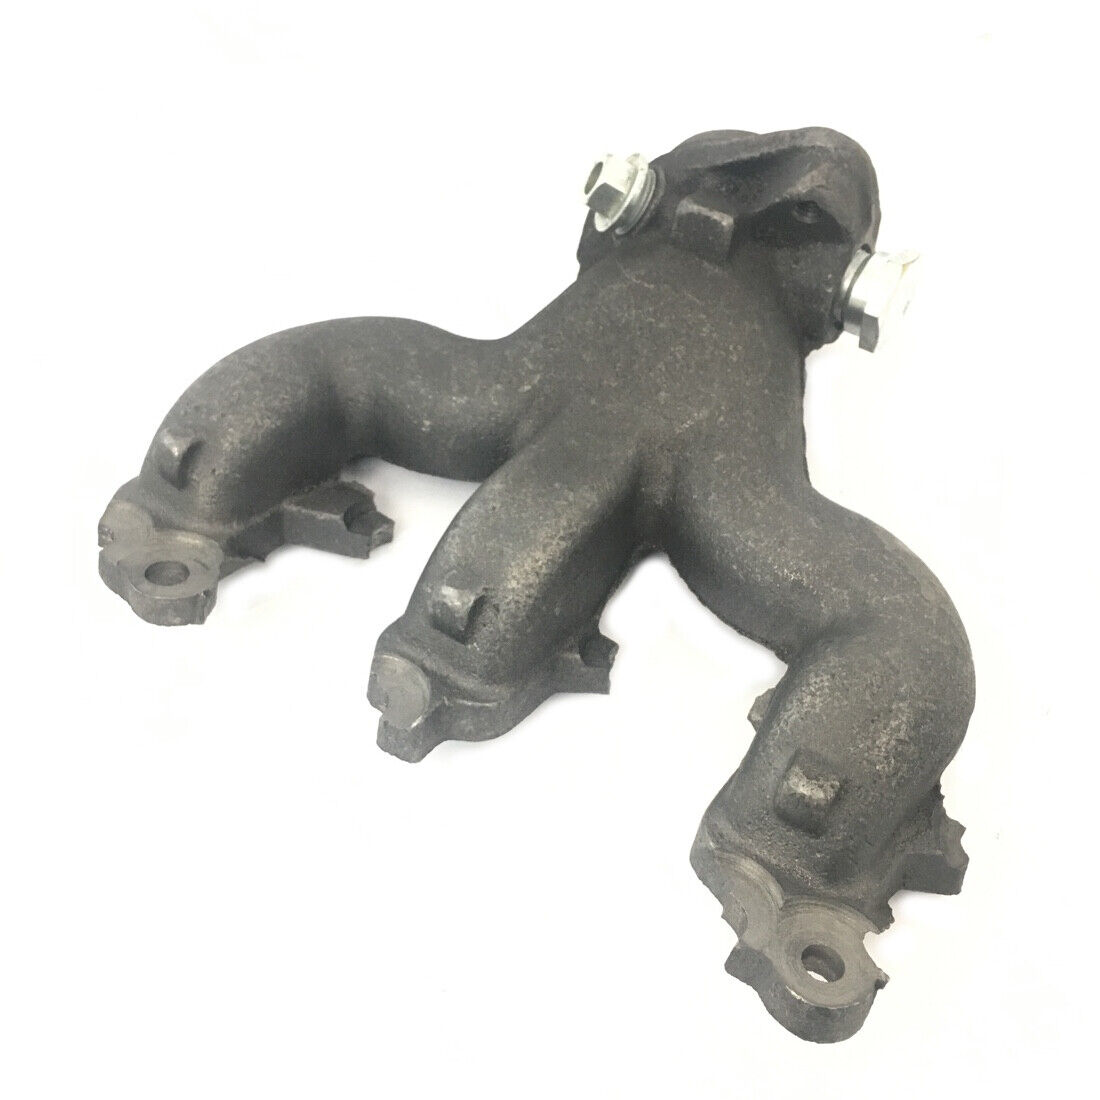 Exhaust Manifold for FORD F-Series Pickup E-Series Van 4.9L 300 6 cyl 87-96 Rear